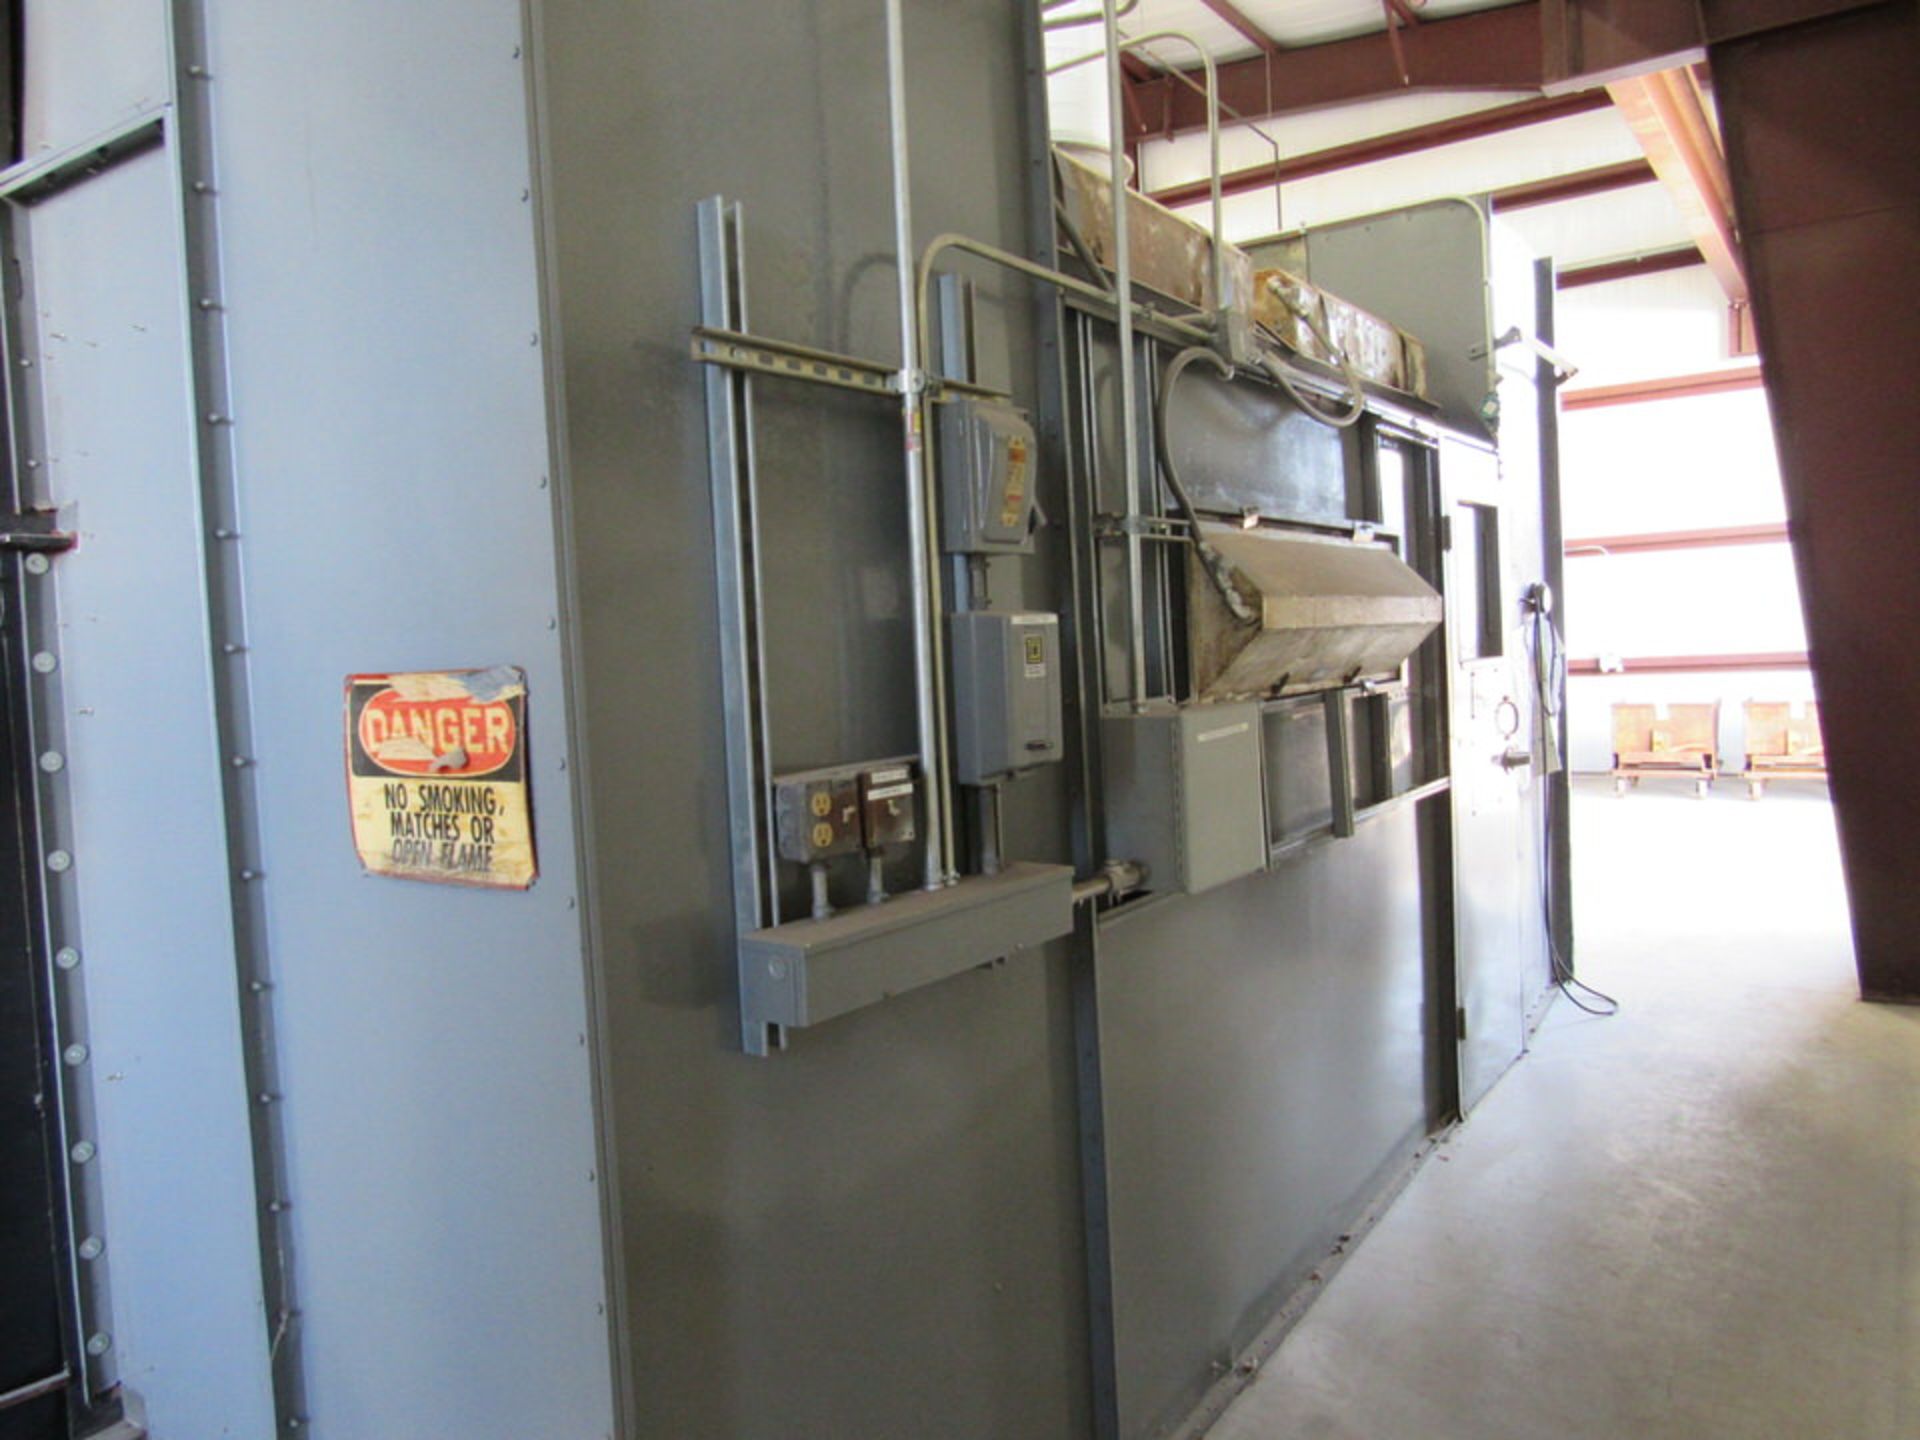 Large Capacity Self-Contained Paint Booth with integrated Bake/Curing Electric Oven. - Image 6 of 14